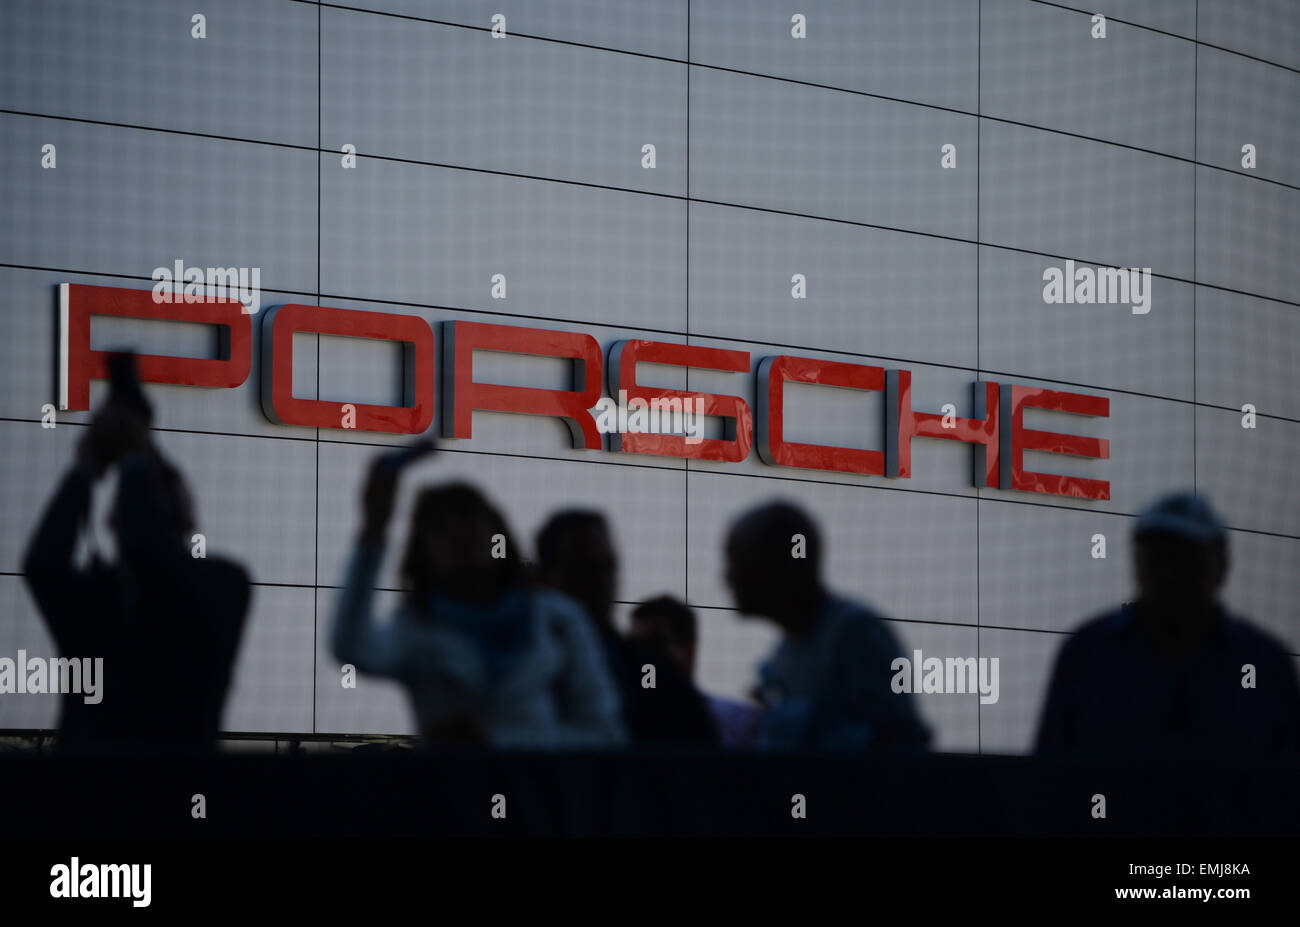 Stuttgart, Germany. 21st Apr, 2015. Spectators and visitors stand in front of the Porsche Museum during a show match at the WTA tennis tournament in Stuttgart, Germany, 21 April 2015. Photo: Marijan Murat/dpa/Alamy Live News Stock Photo